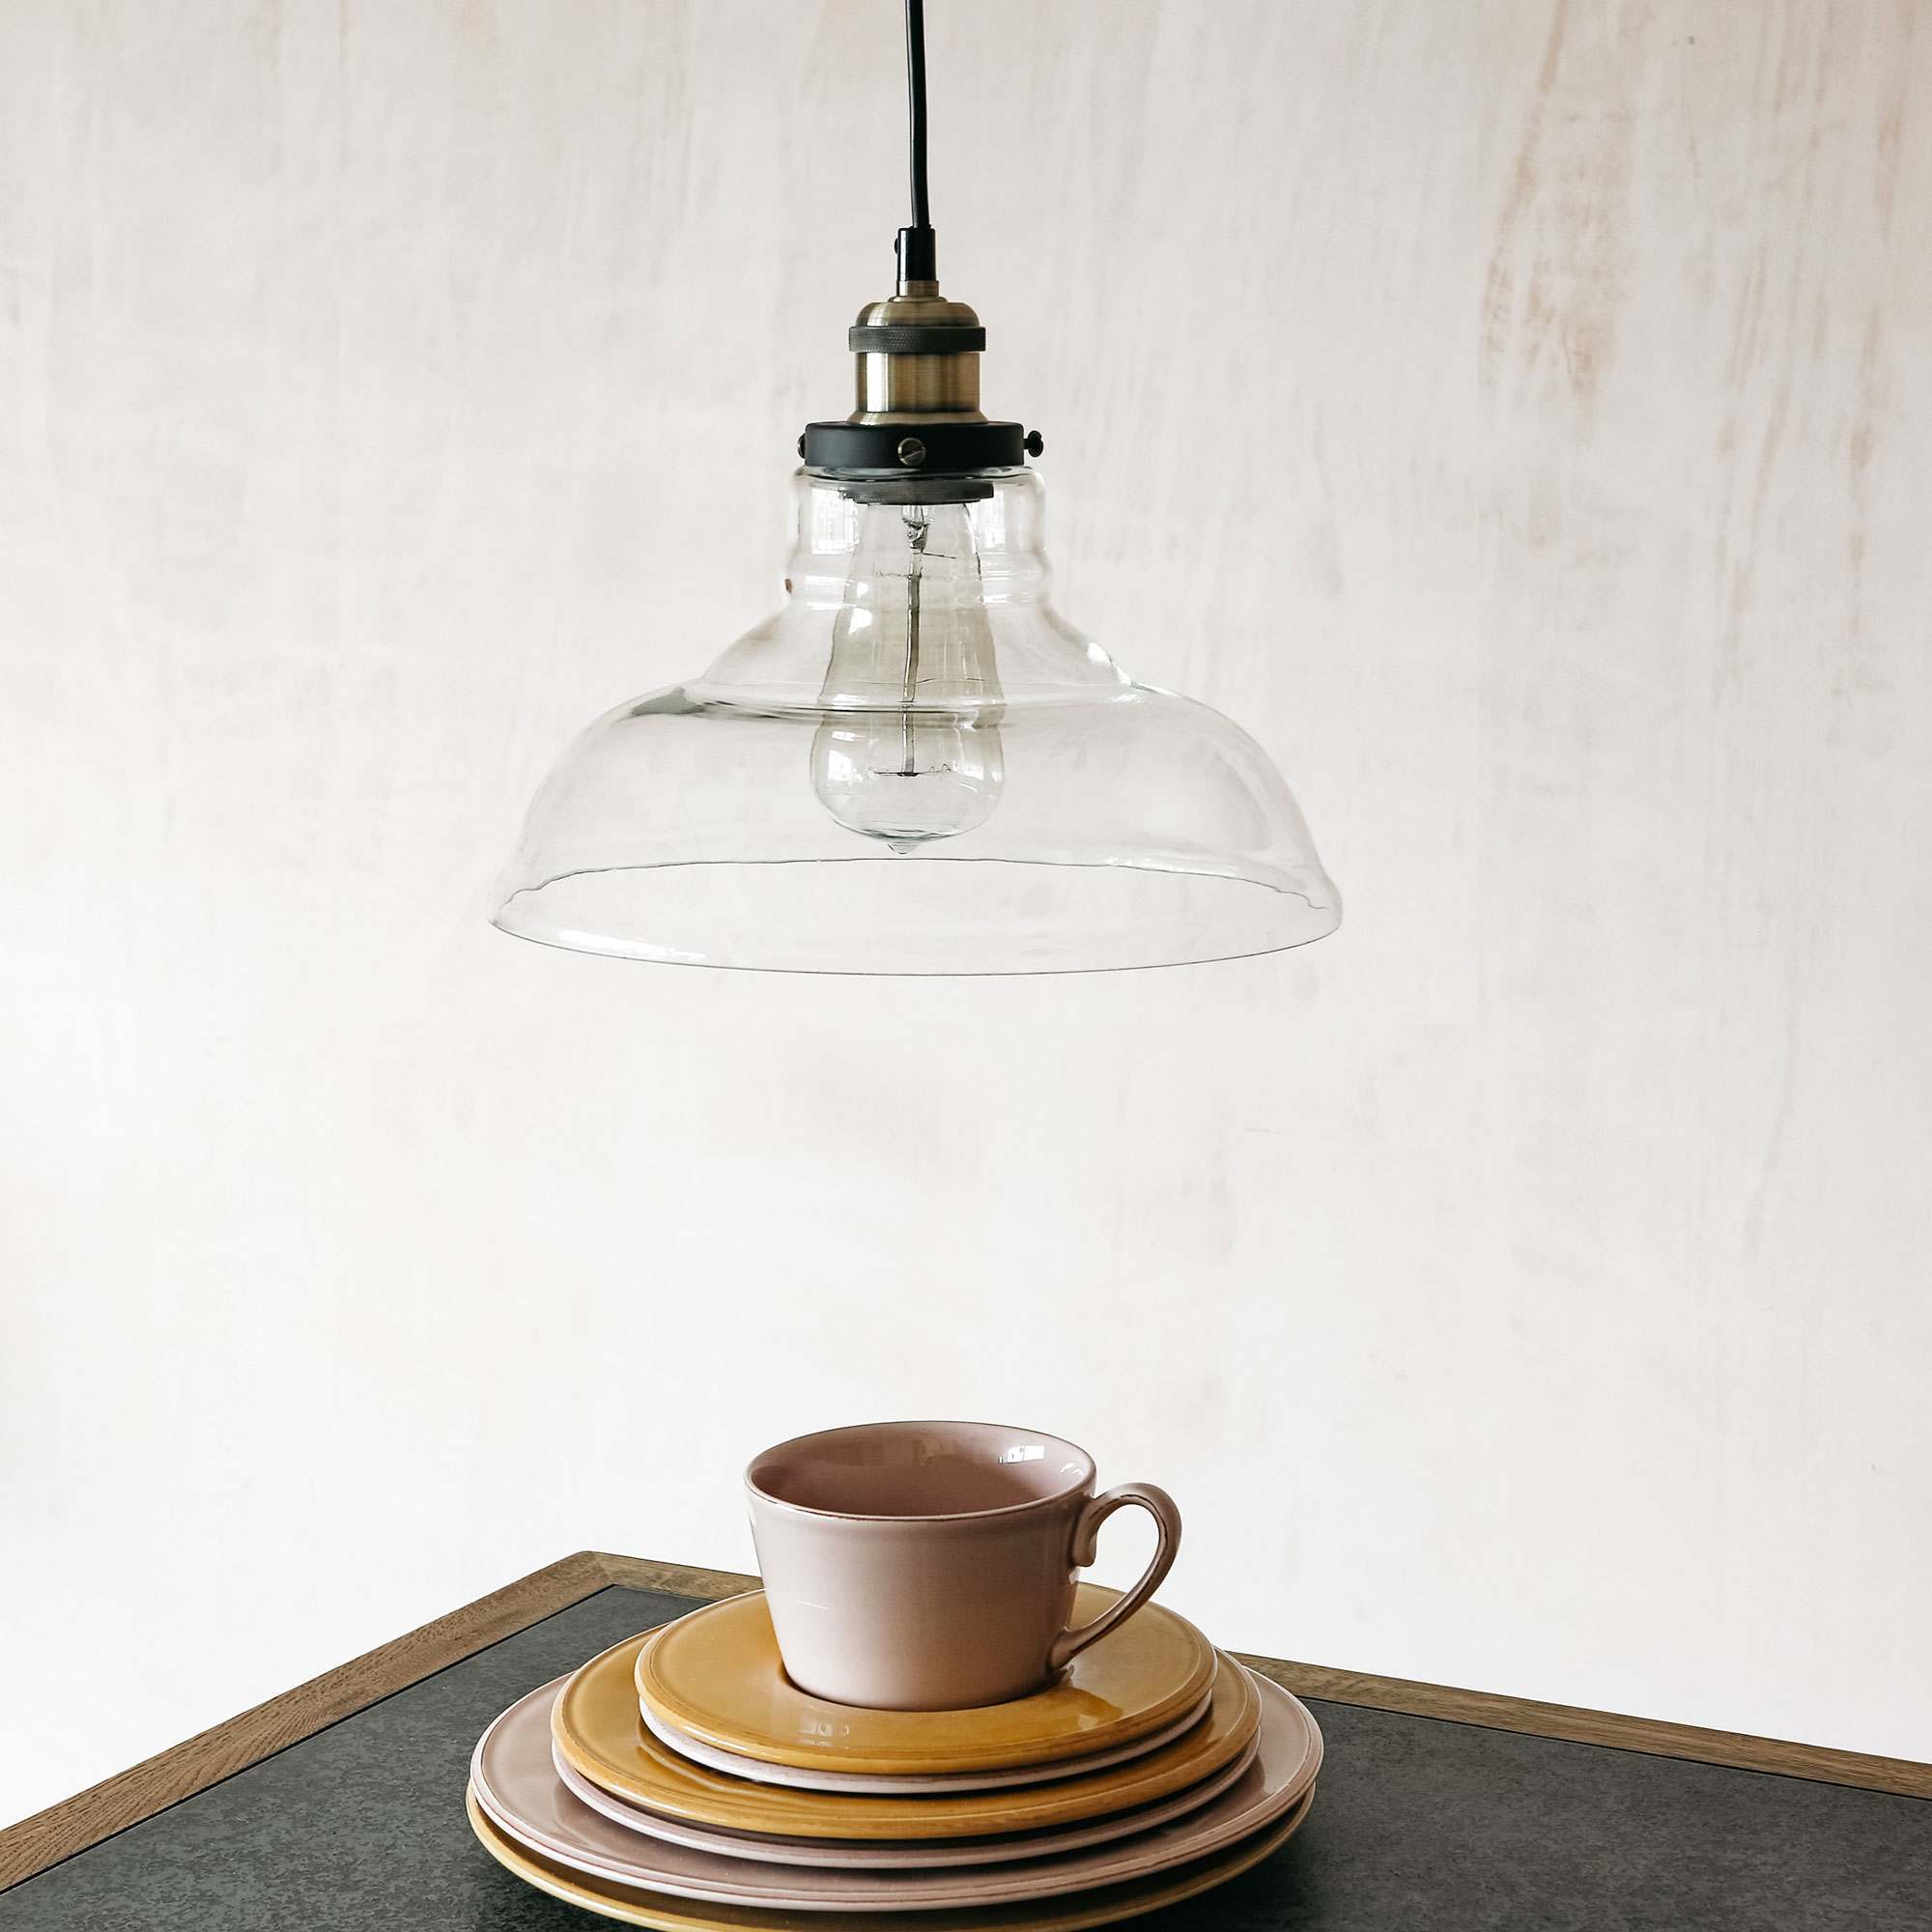 Read more about Graham and green glass pendant light